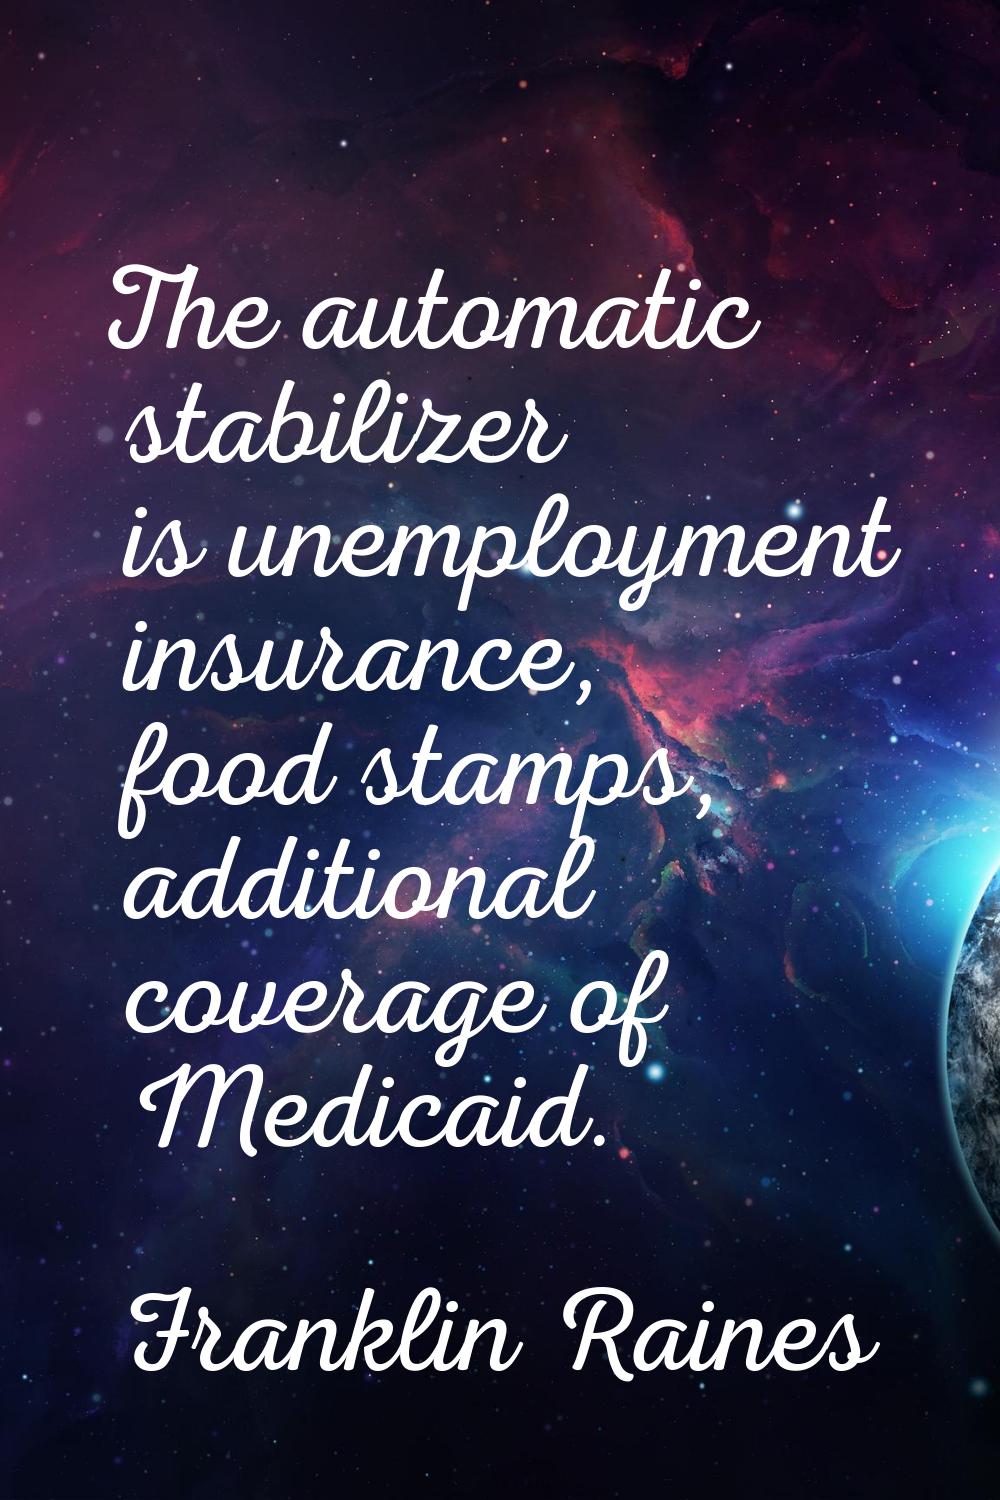 The automatic stabilizer is unemployment insurance, food stamps, additional coverage of Medicaid.